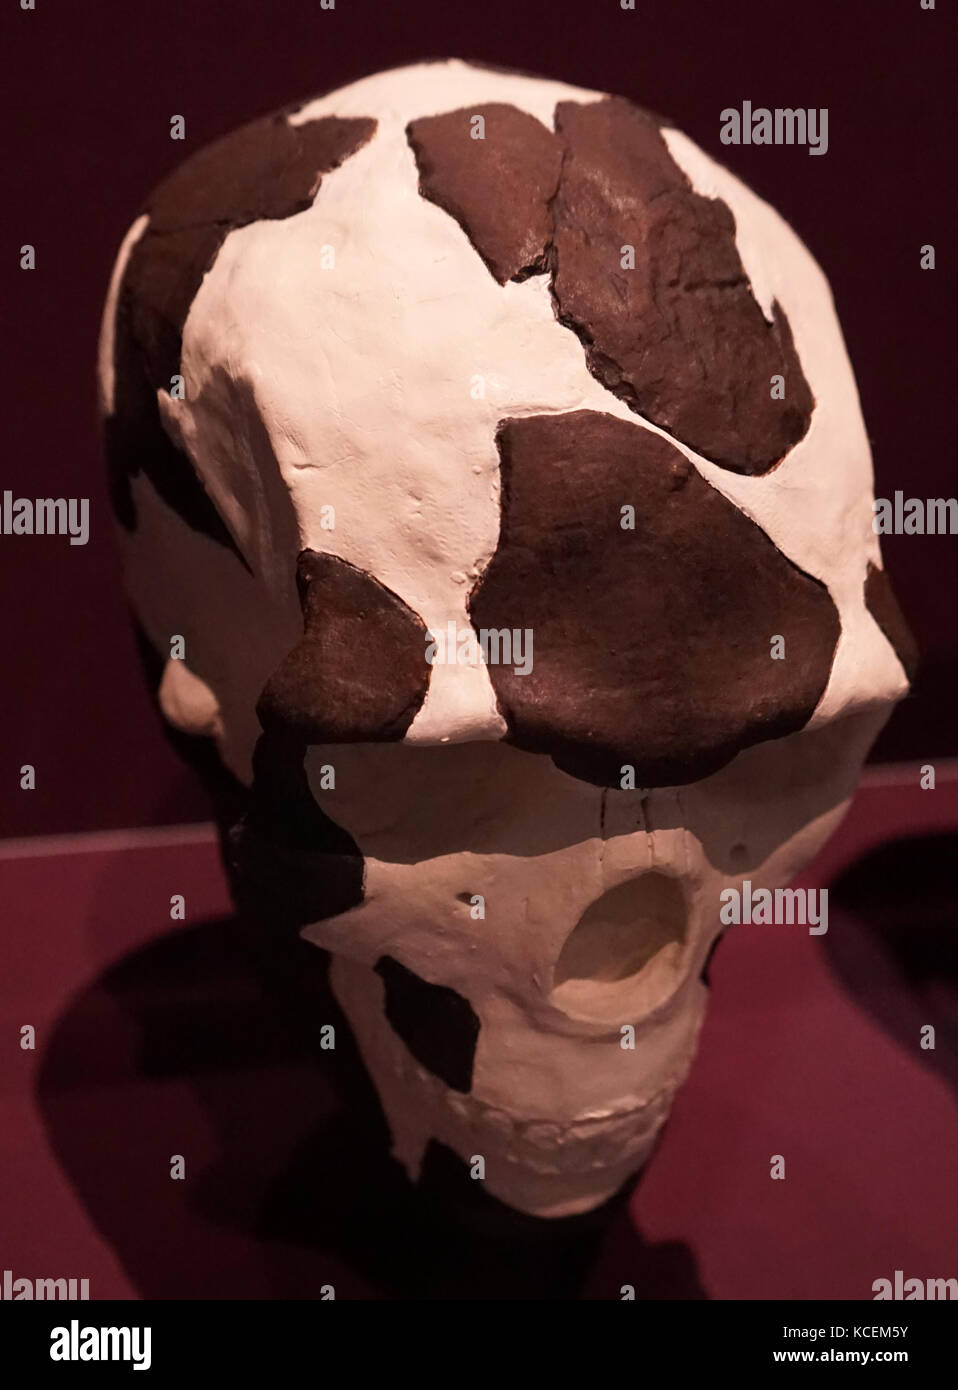 Fragmented skull of an East African Homo Sapiens. Stock Photo